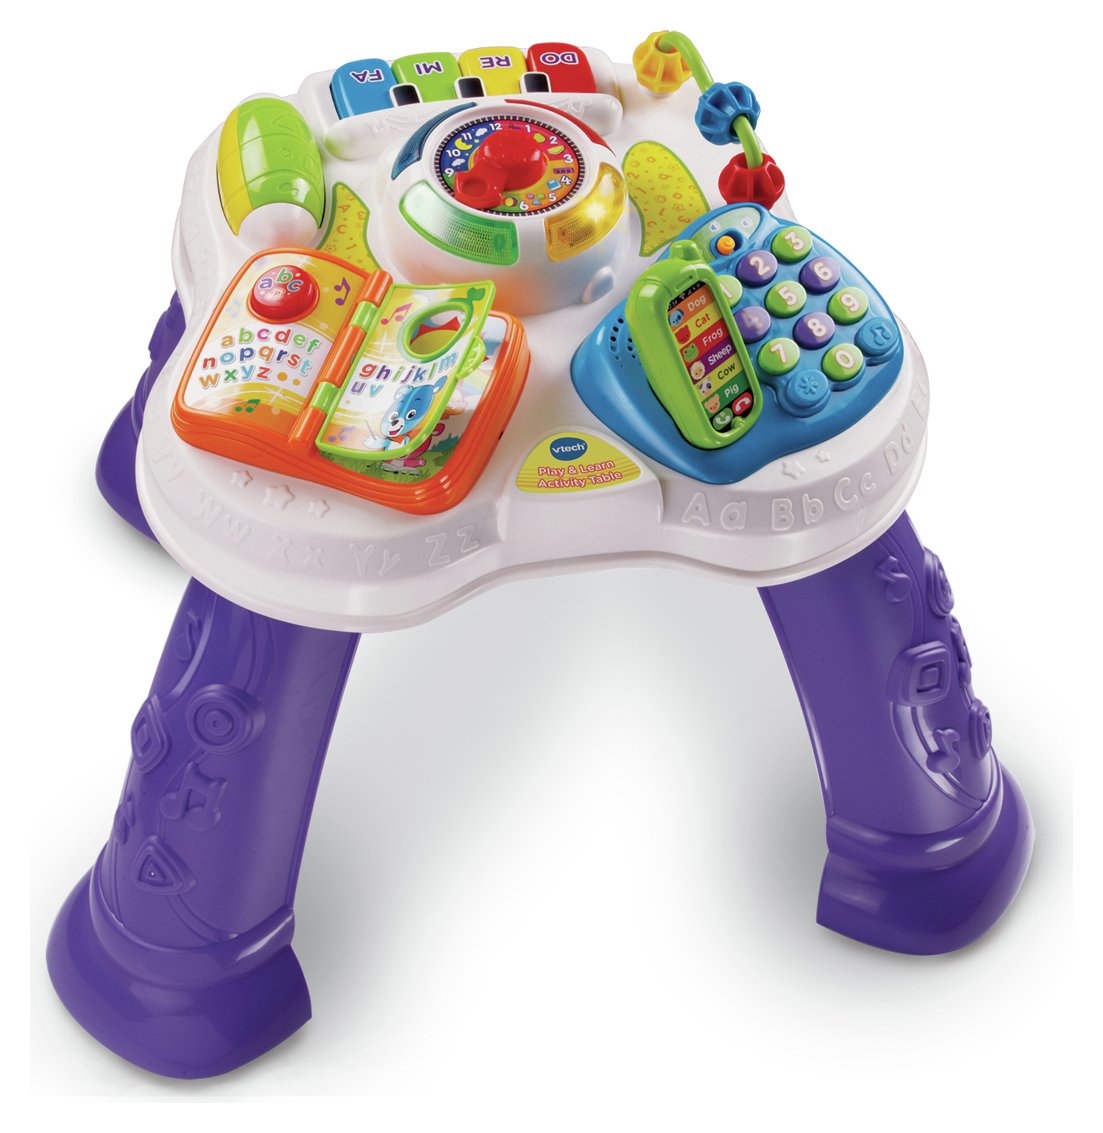 VTech Play and Learn Activity Table